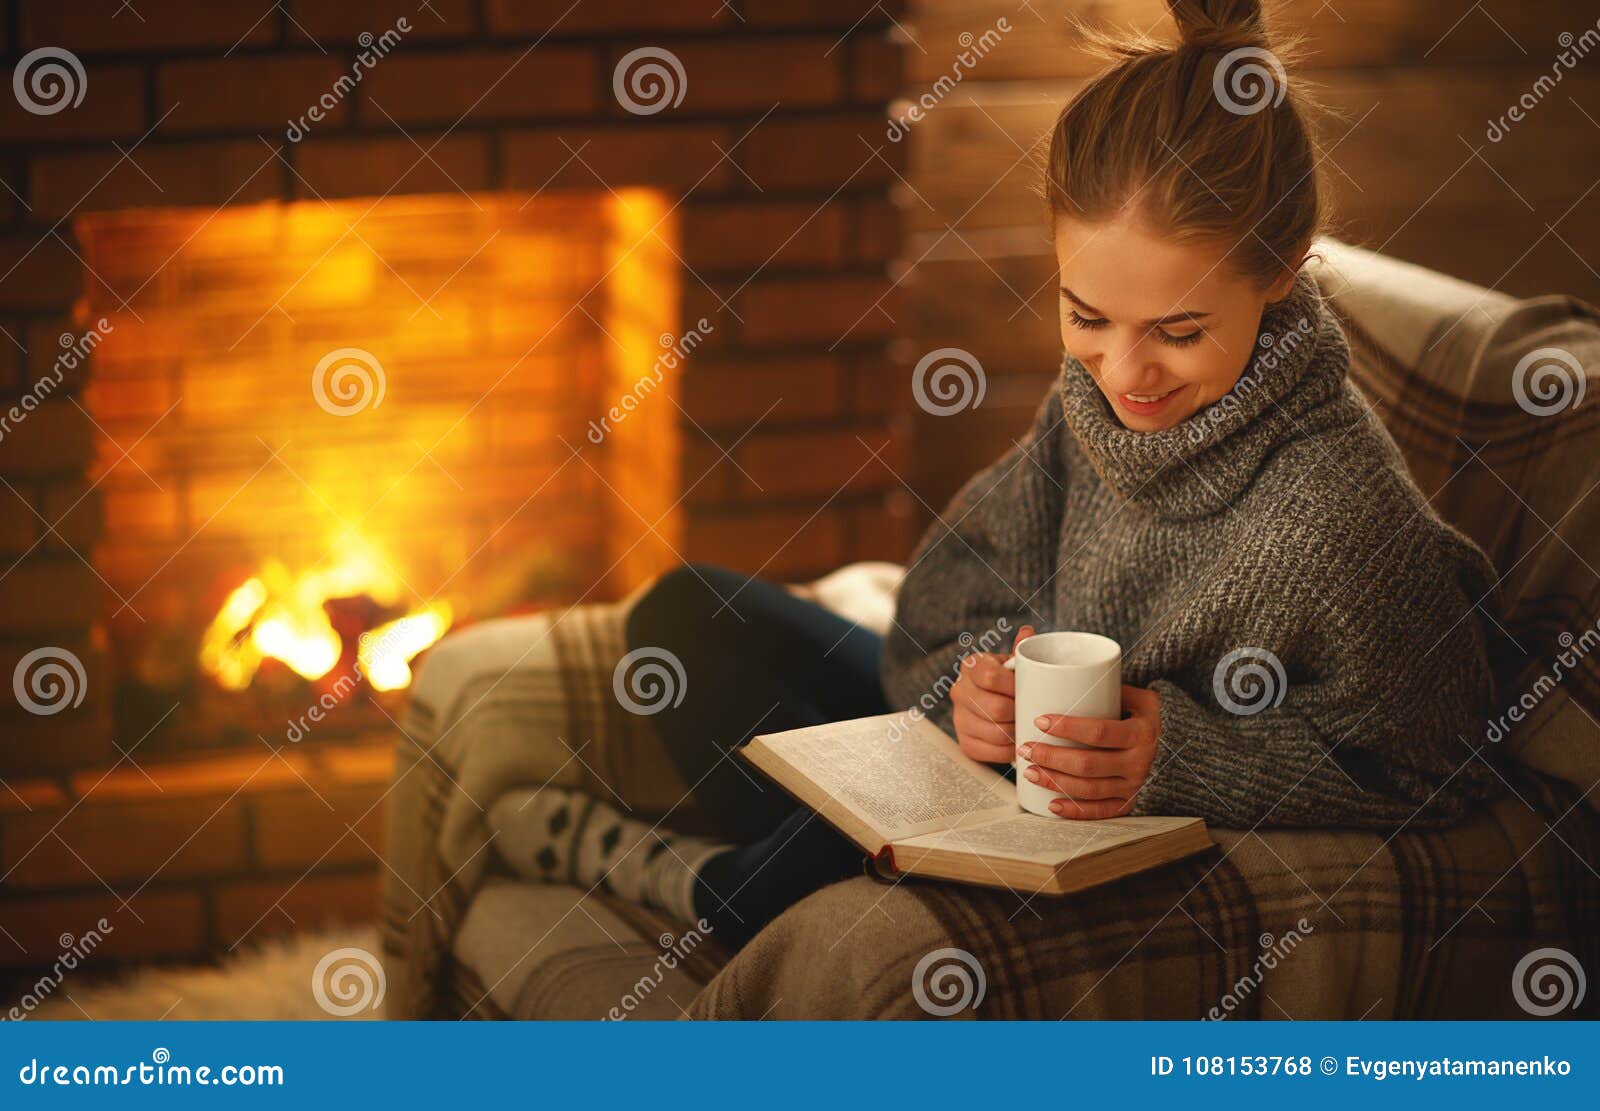 young woman reading a book by the fireplace on a winter evenin